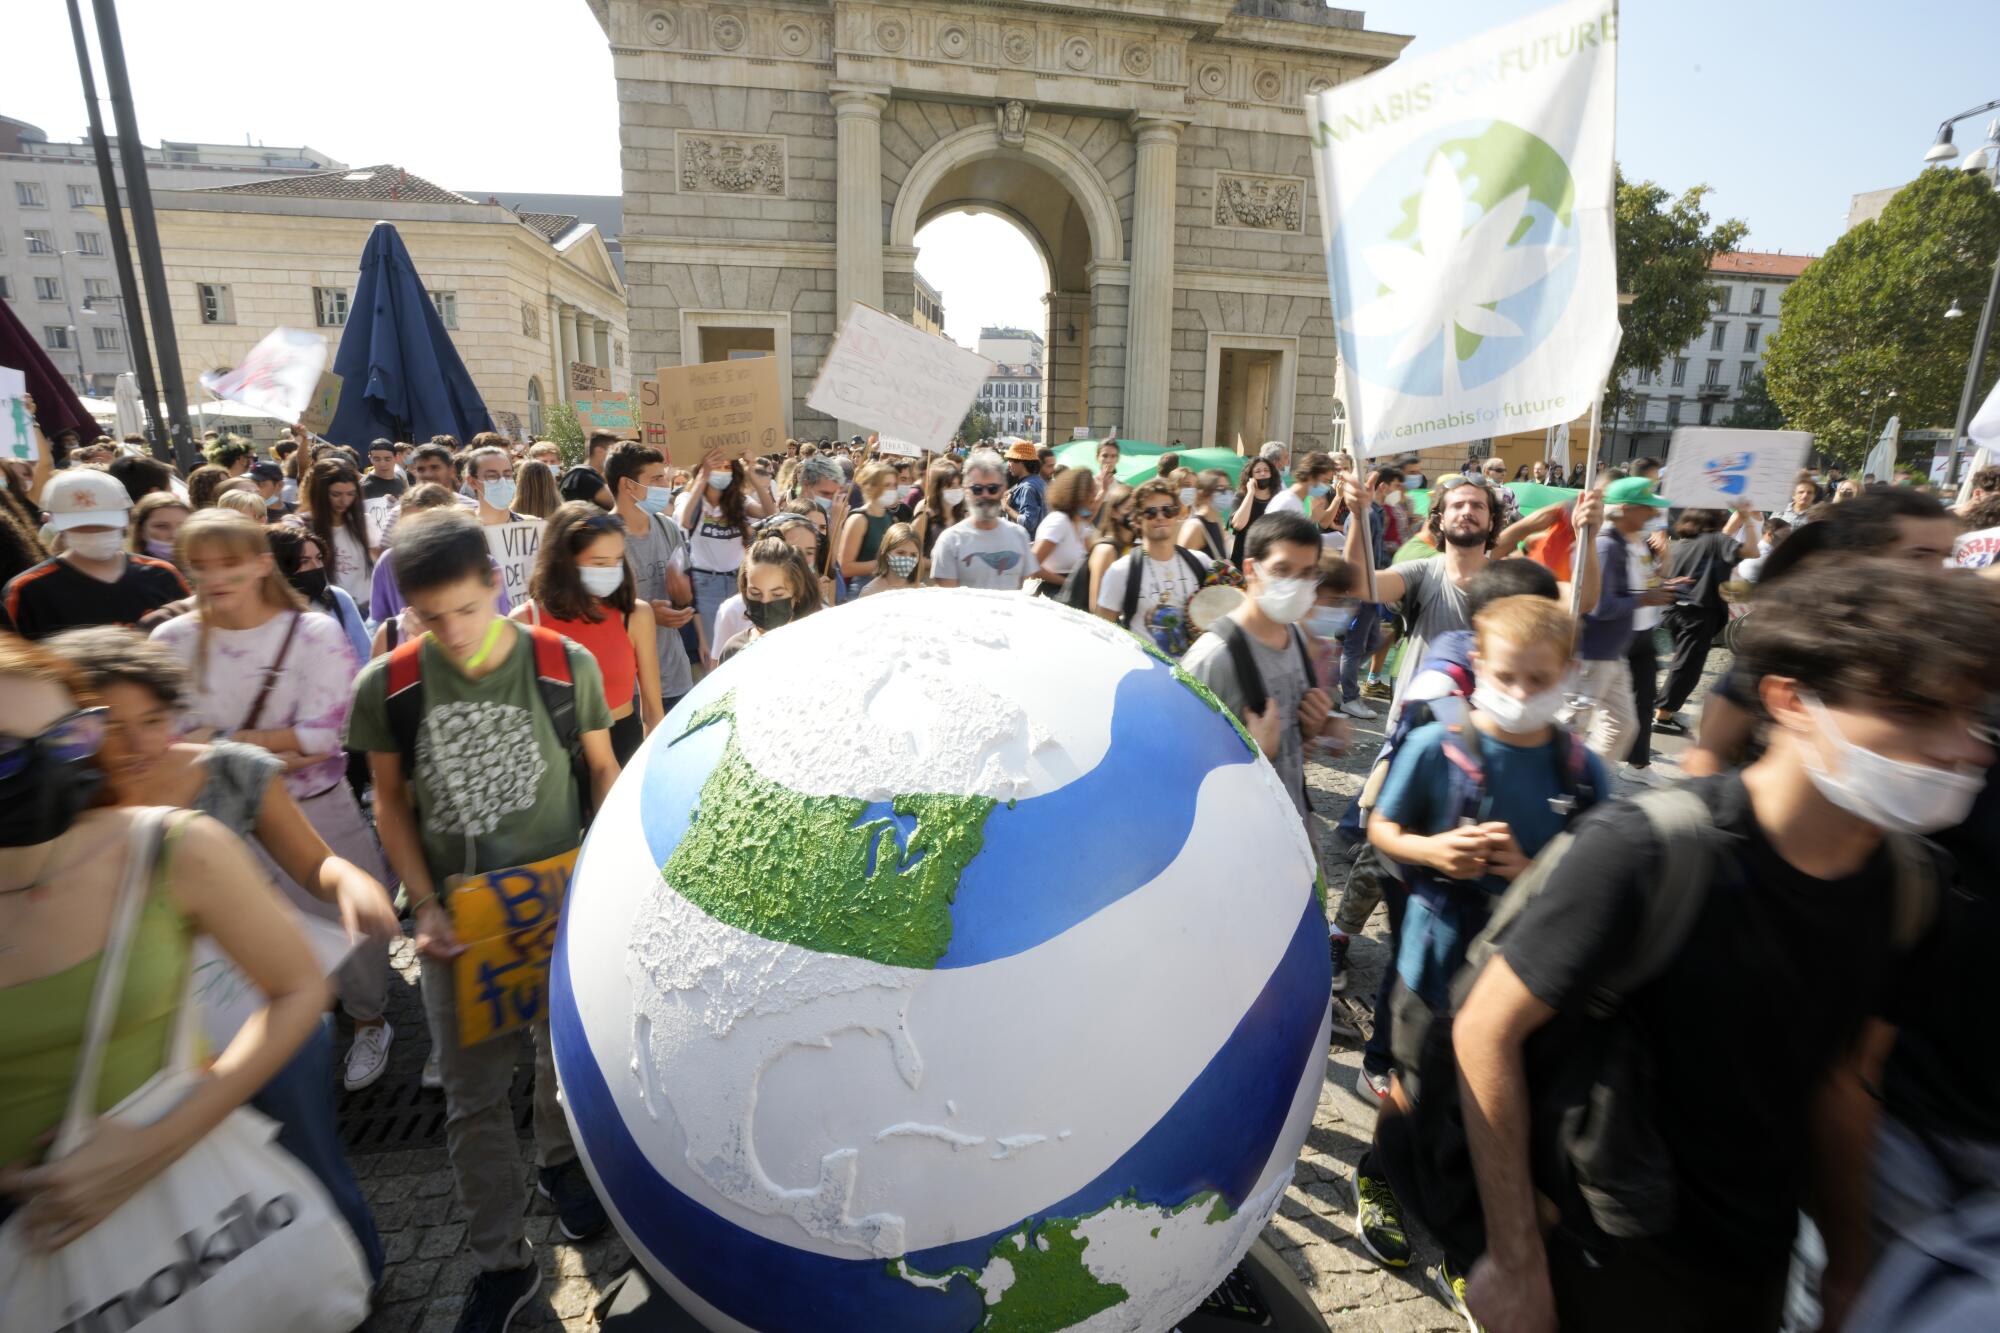 A large globe is used in a street protest.